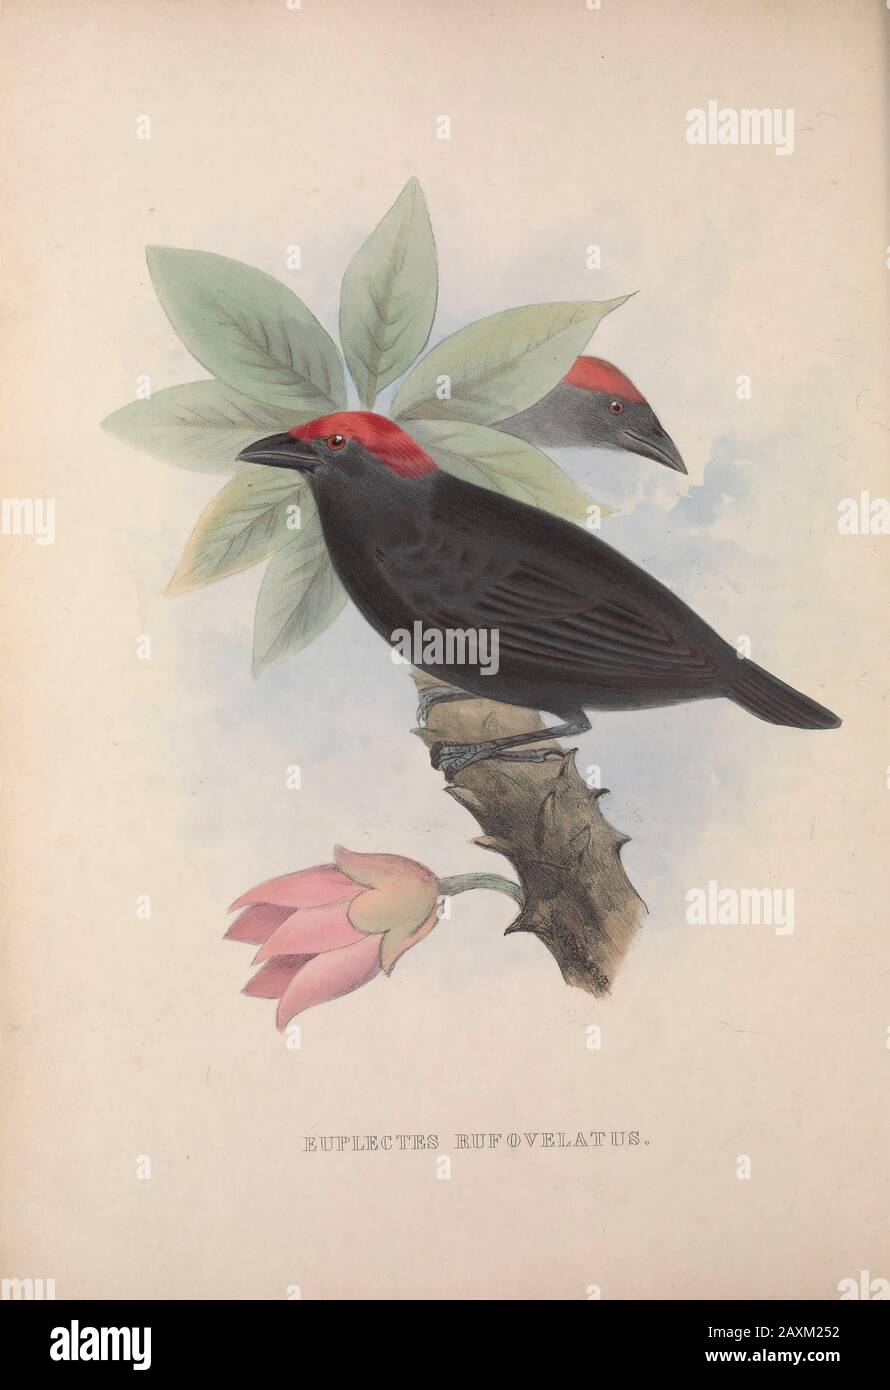 Weaver (Euplectes Rufovelatus) from Zoologia typica; or, Figures of new and rare animals and birds described in the proceedings, or exhibited in the c Stock Photo